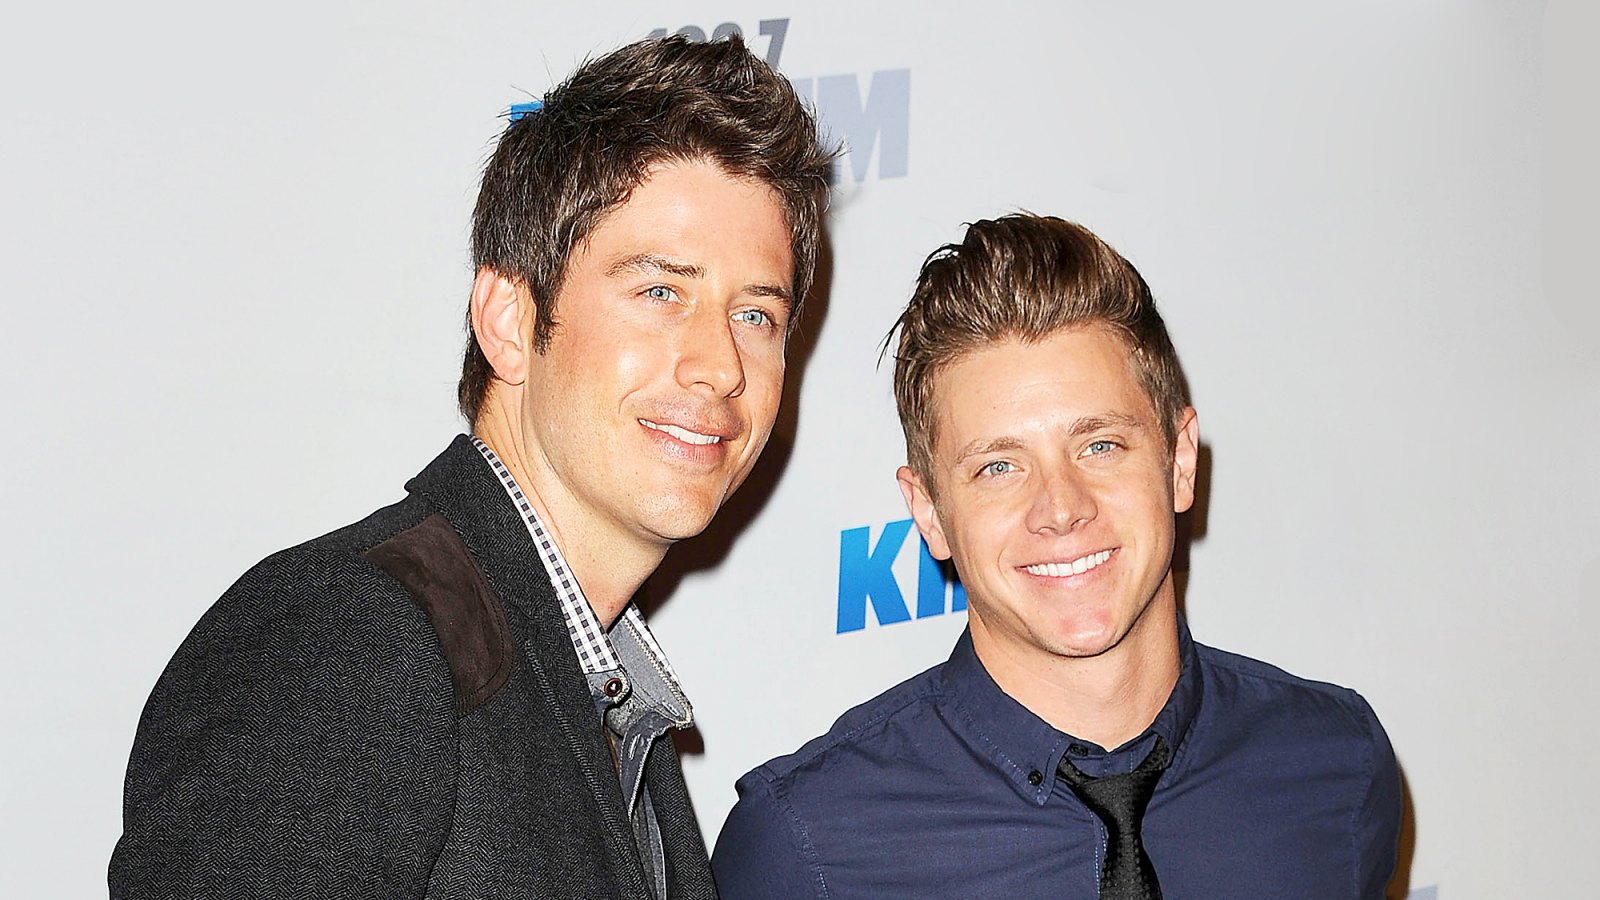 Arie Luyendyk Jr. and Jef Holm attend KIIS FM's Jingle Ball 2012 at Nokia Theatre LA Live in Los Angeles, California.